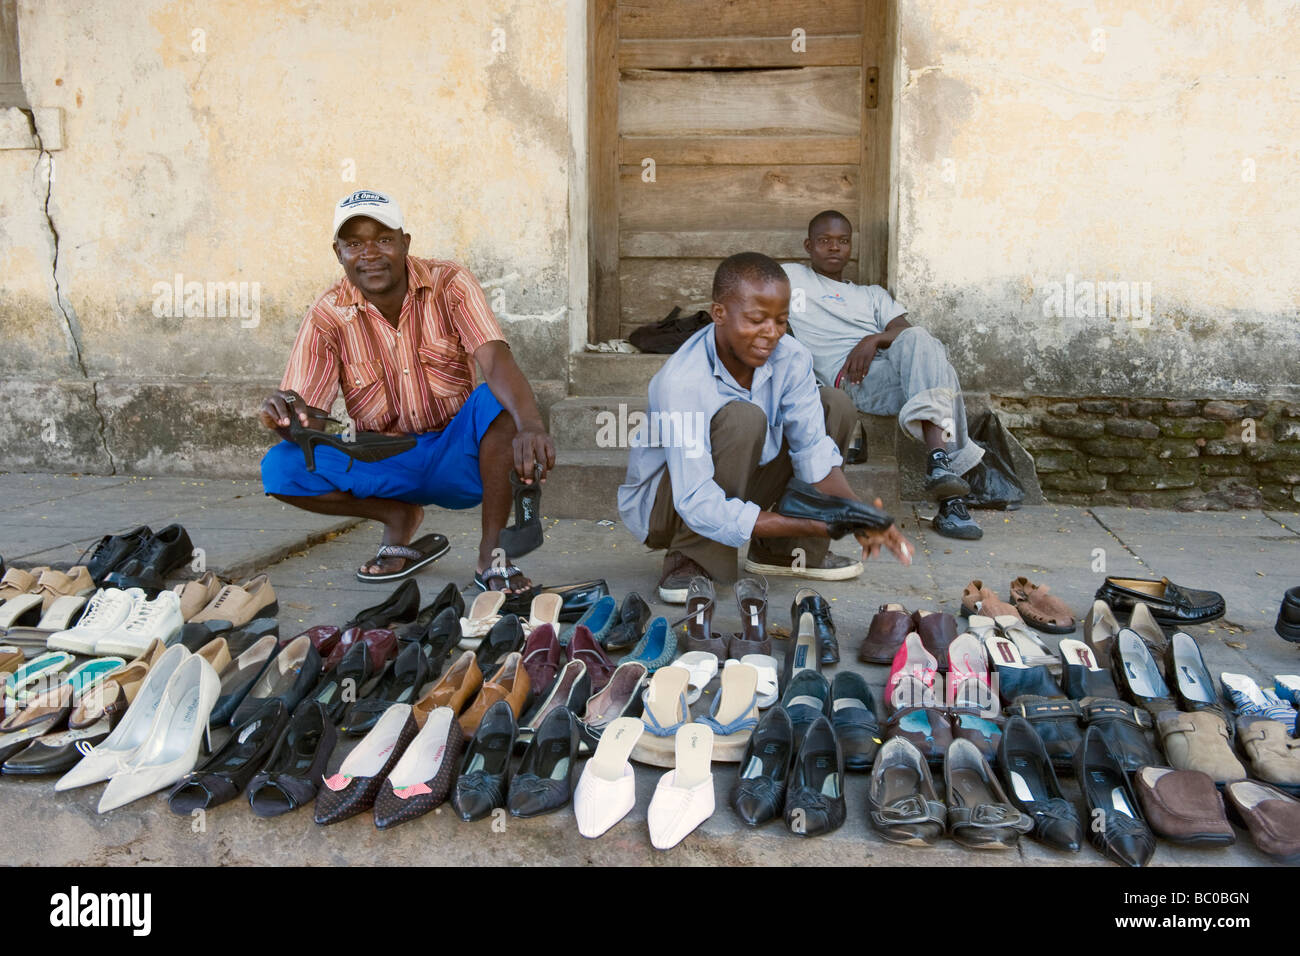 Street hawkers selling shoes Quelimane Mozambique Stock Photo - Alamy